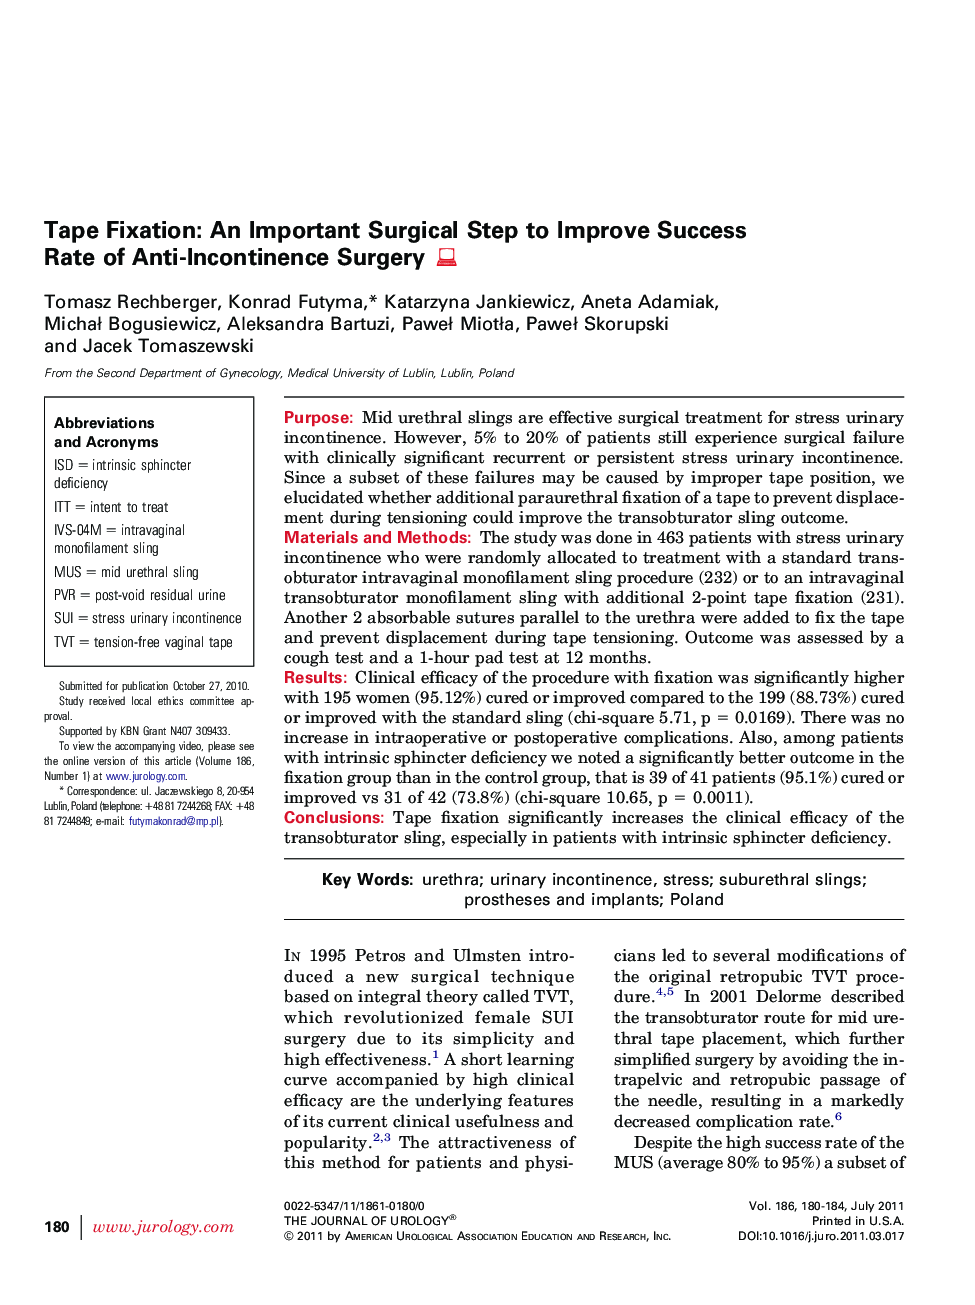 Tape Fixation: An Important Surgical Step to Improve Success Rate of Anti-Incontinence Surgery